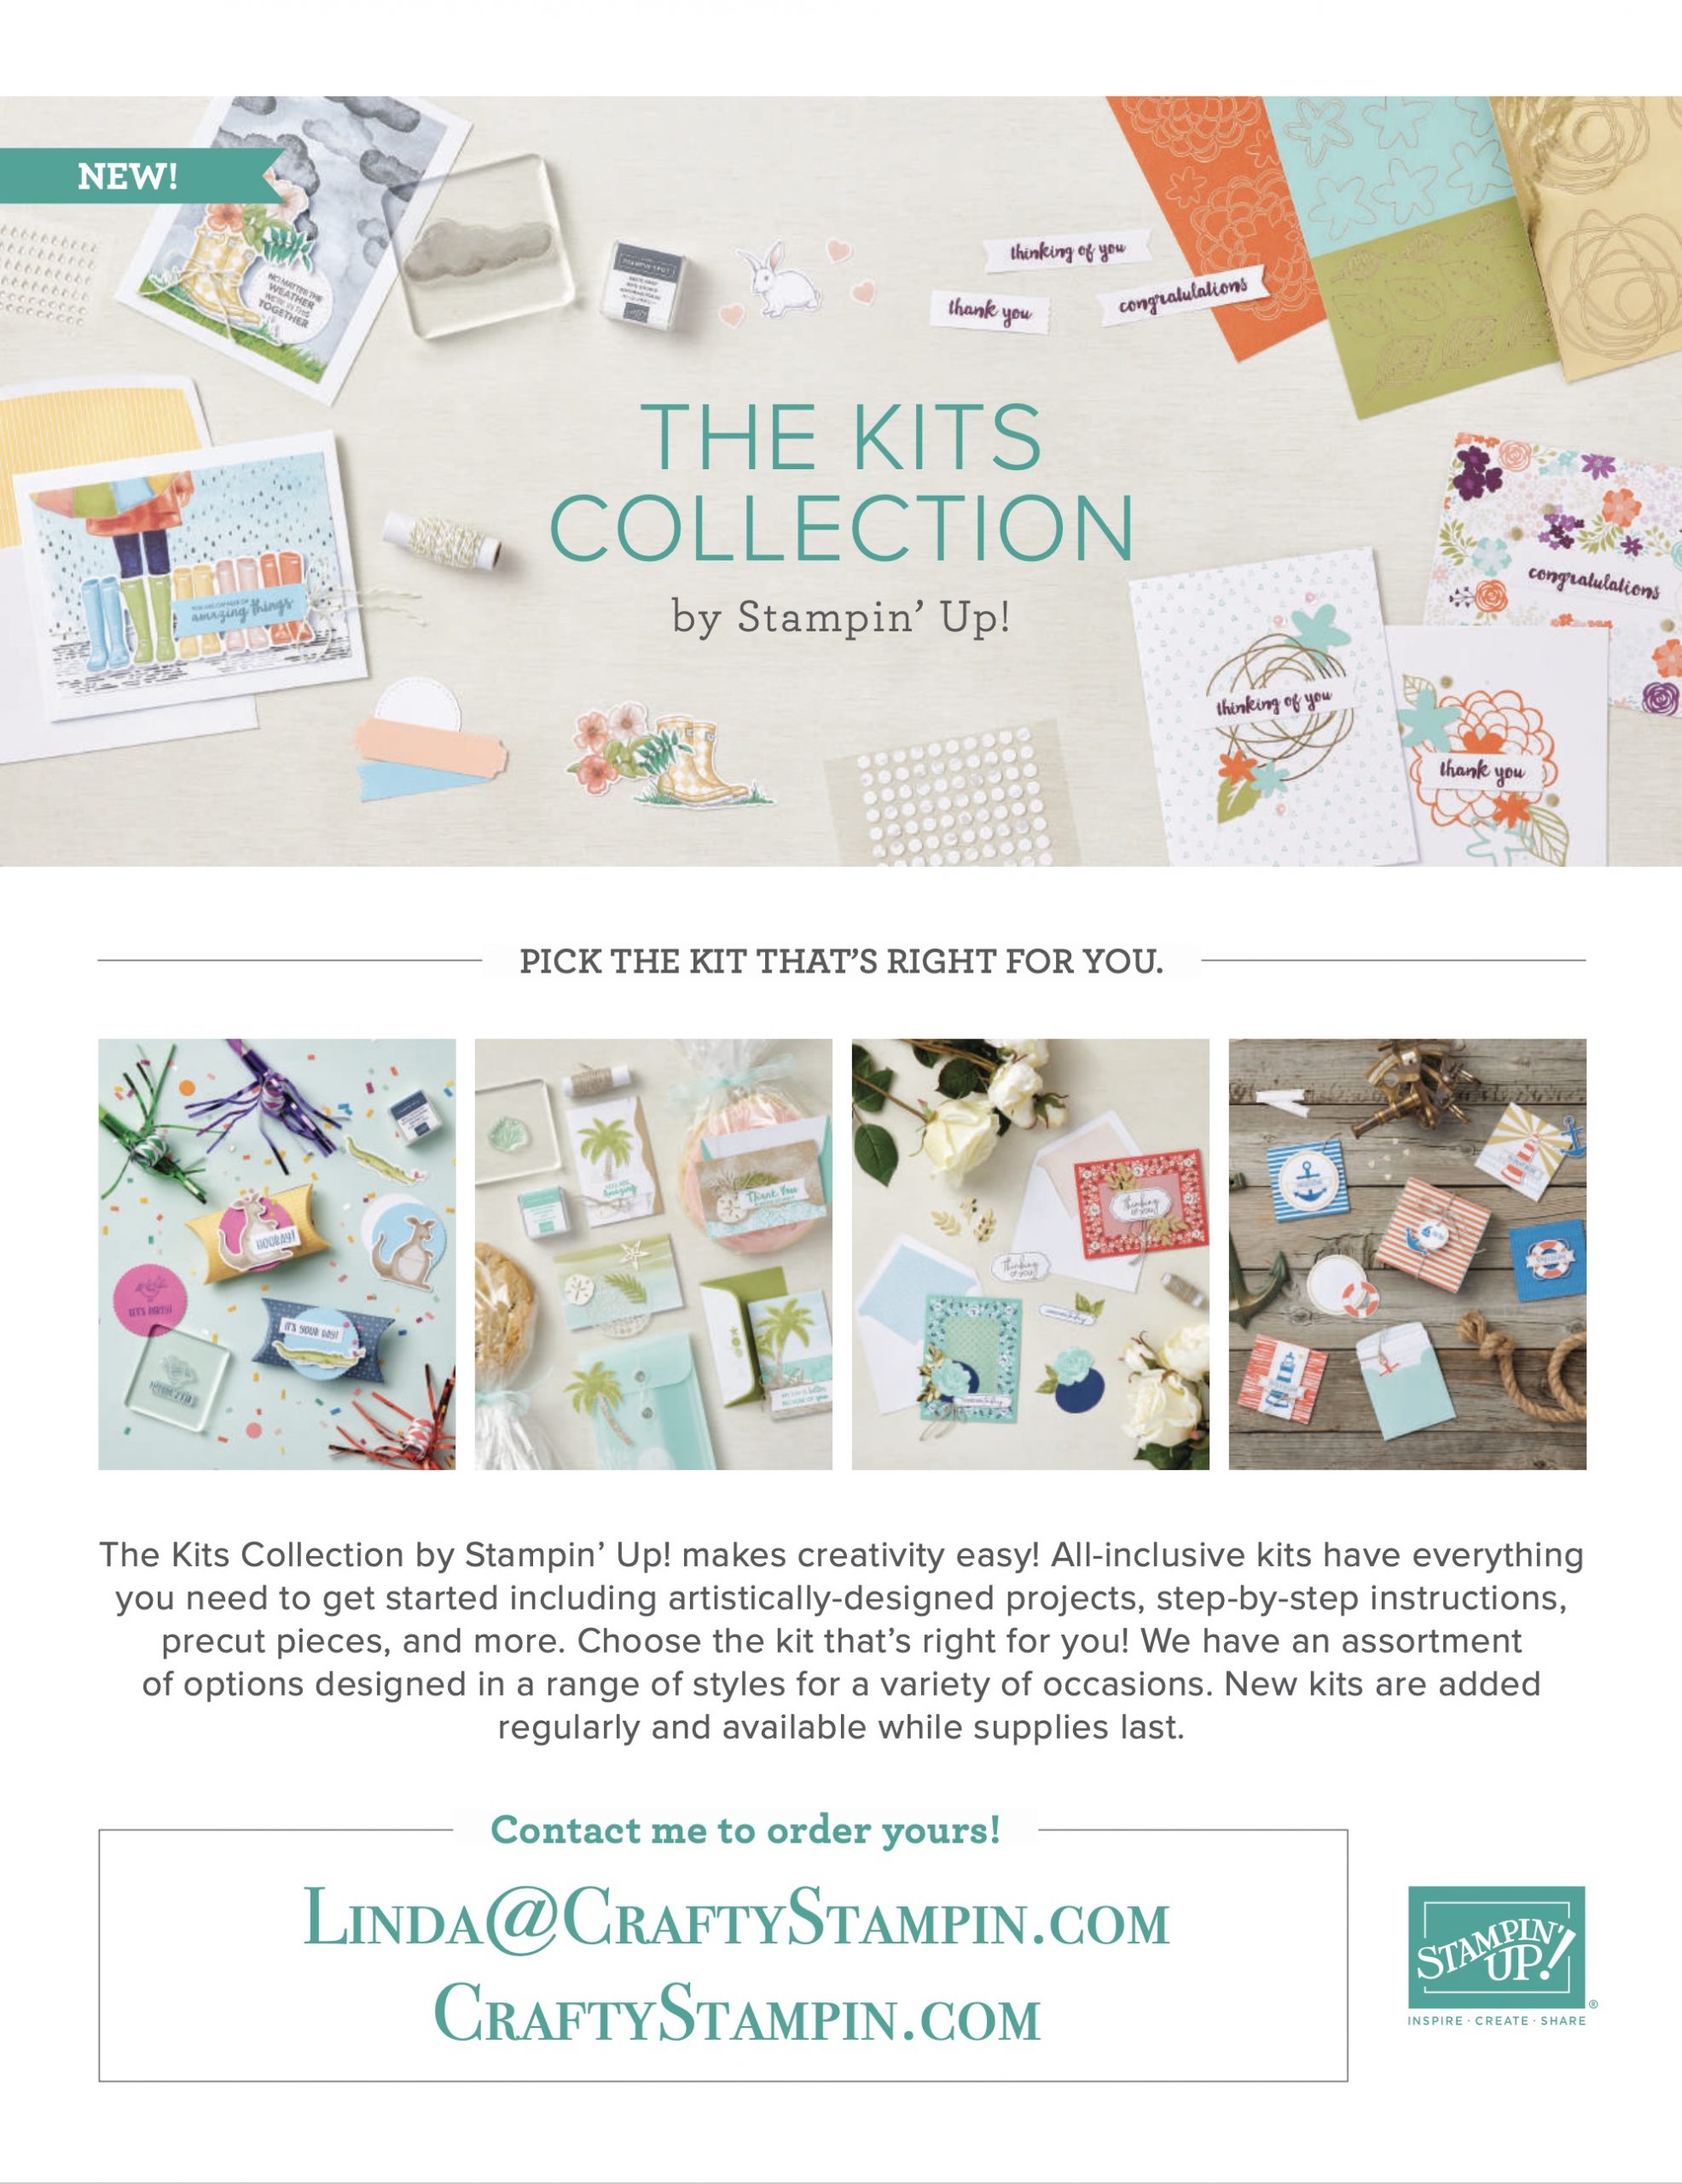 The Kits Collection by Stampin' Up! | Join Stampin’ Up! | Frequently Asked Questions about becoming a Stampin’ Up! Demonstrator | Join the Craft Stampin’ Crew | Stampin Up Demonstrator Linda Cullen | Crafty Stampin’ | Purchase your Stampin’ Up